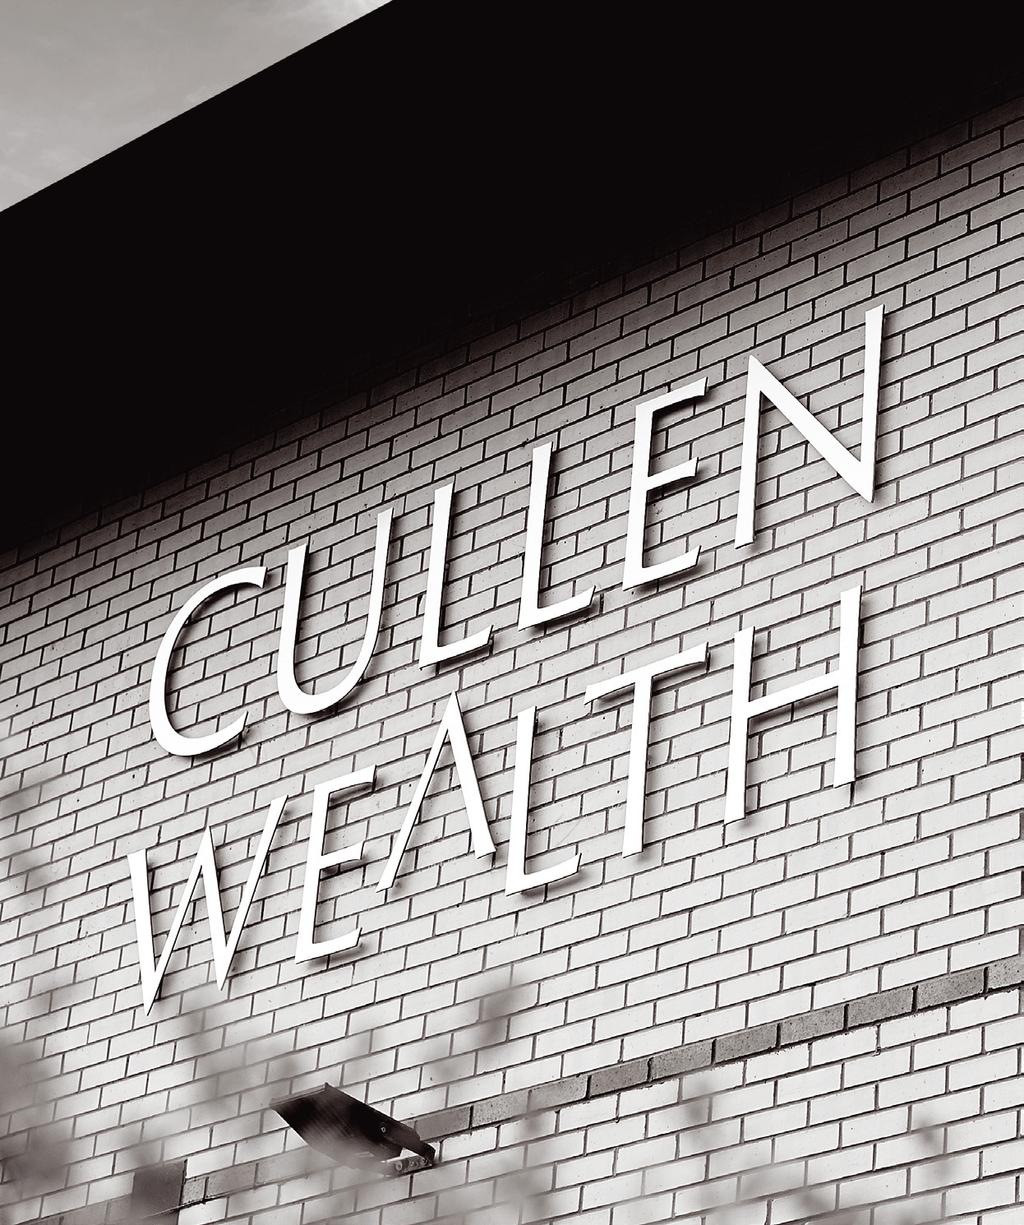 Contact us: 0161 975 6700 askus@cullenwealth.co.uk www.cullenwealth.co.uk Cullen Wealth Limited is authorised and regulated by the Financial Conduct Authority.